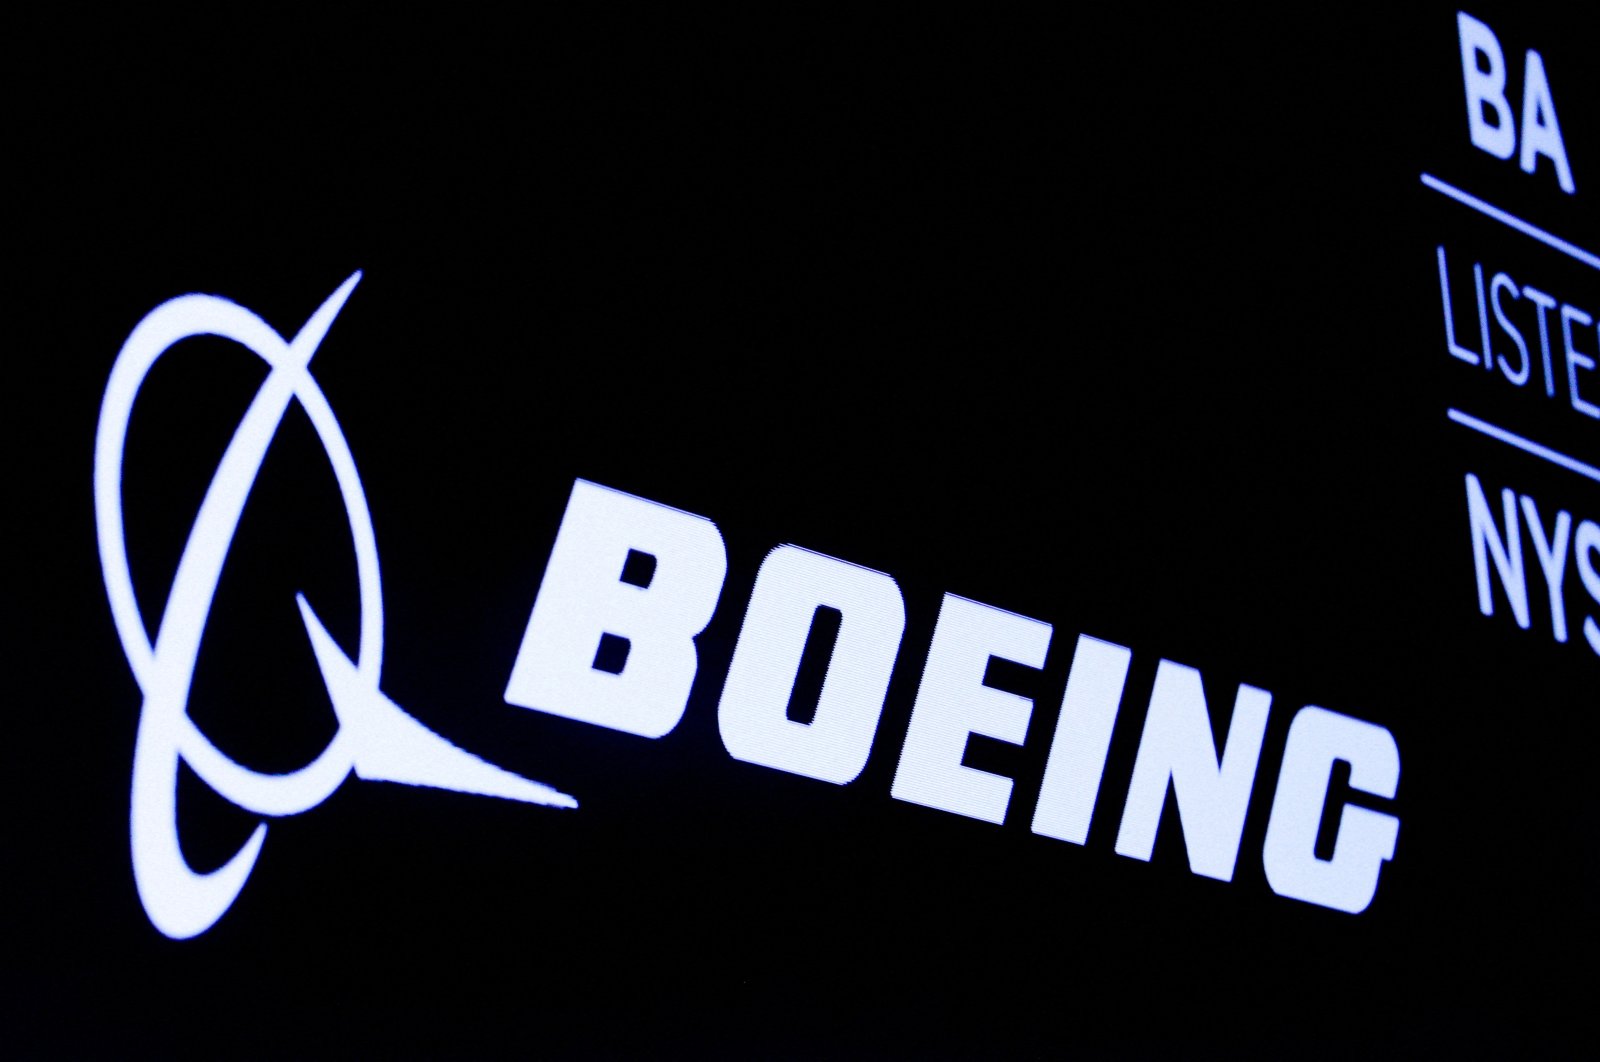 The Boeing logo is displayed on a screen at the New York Stock Exchange (NYSE) in New York, U.S., Aug. 7, 2019. (Reuters Photo)